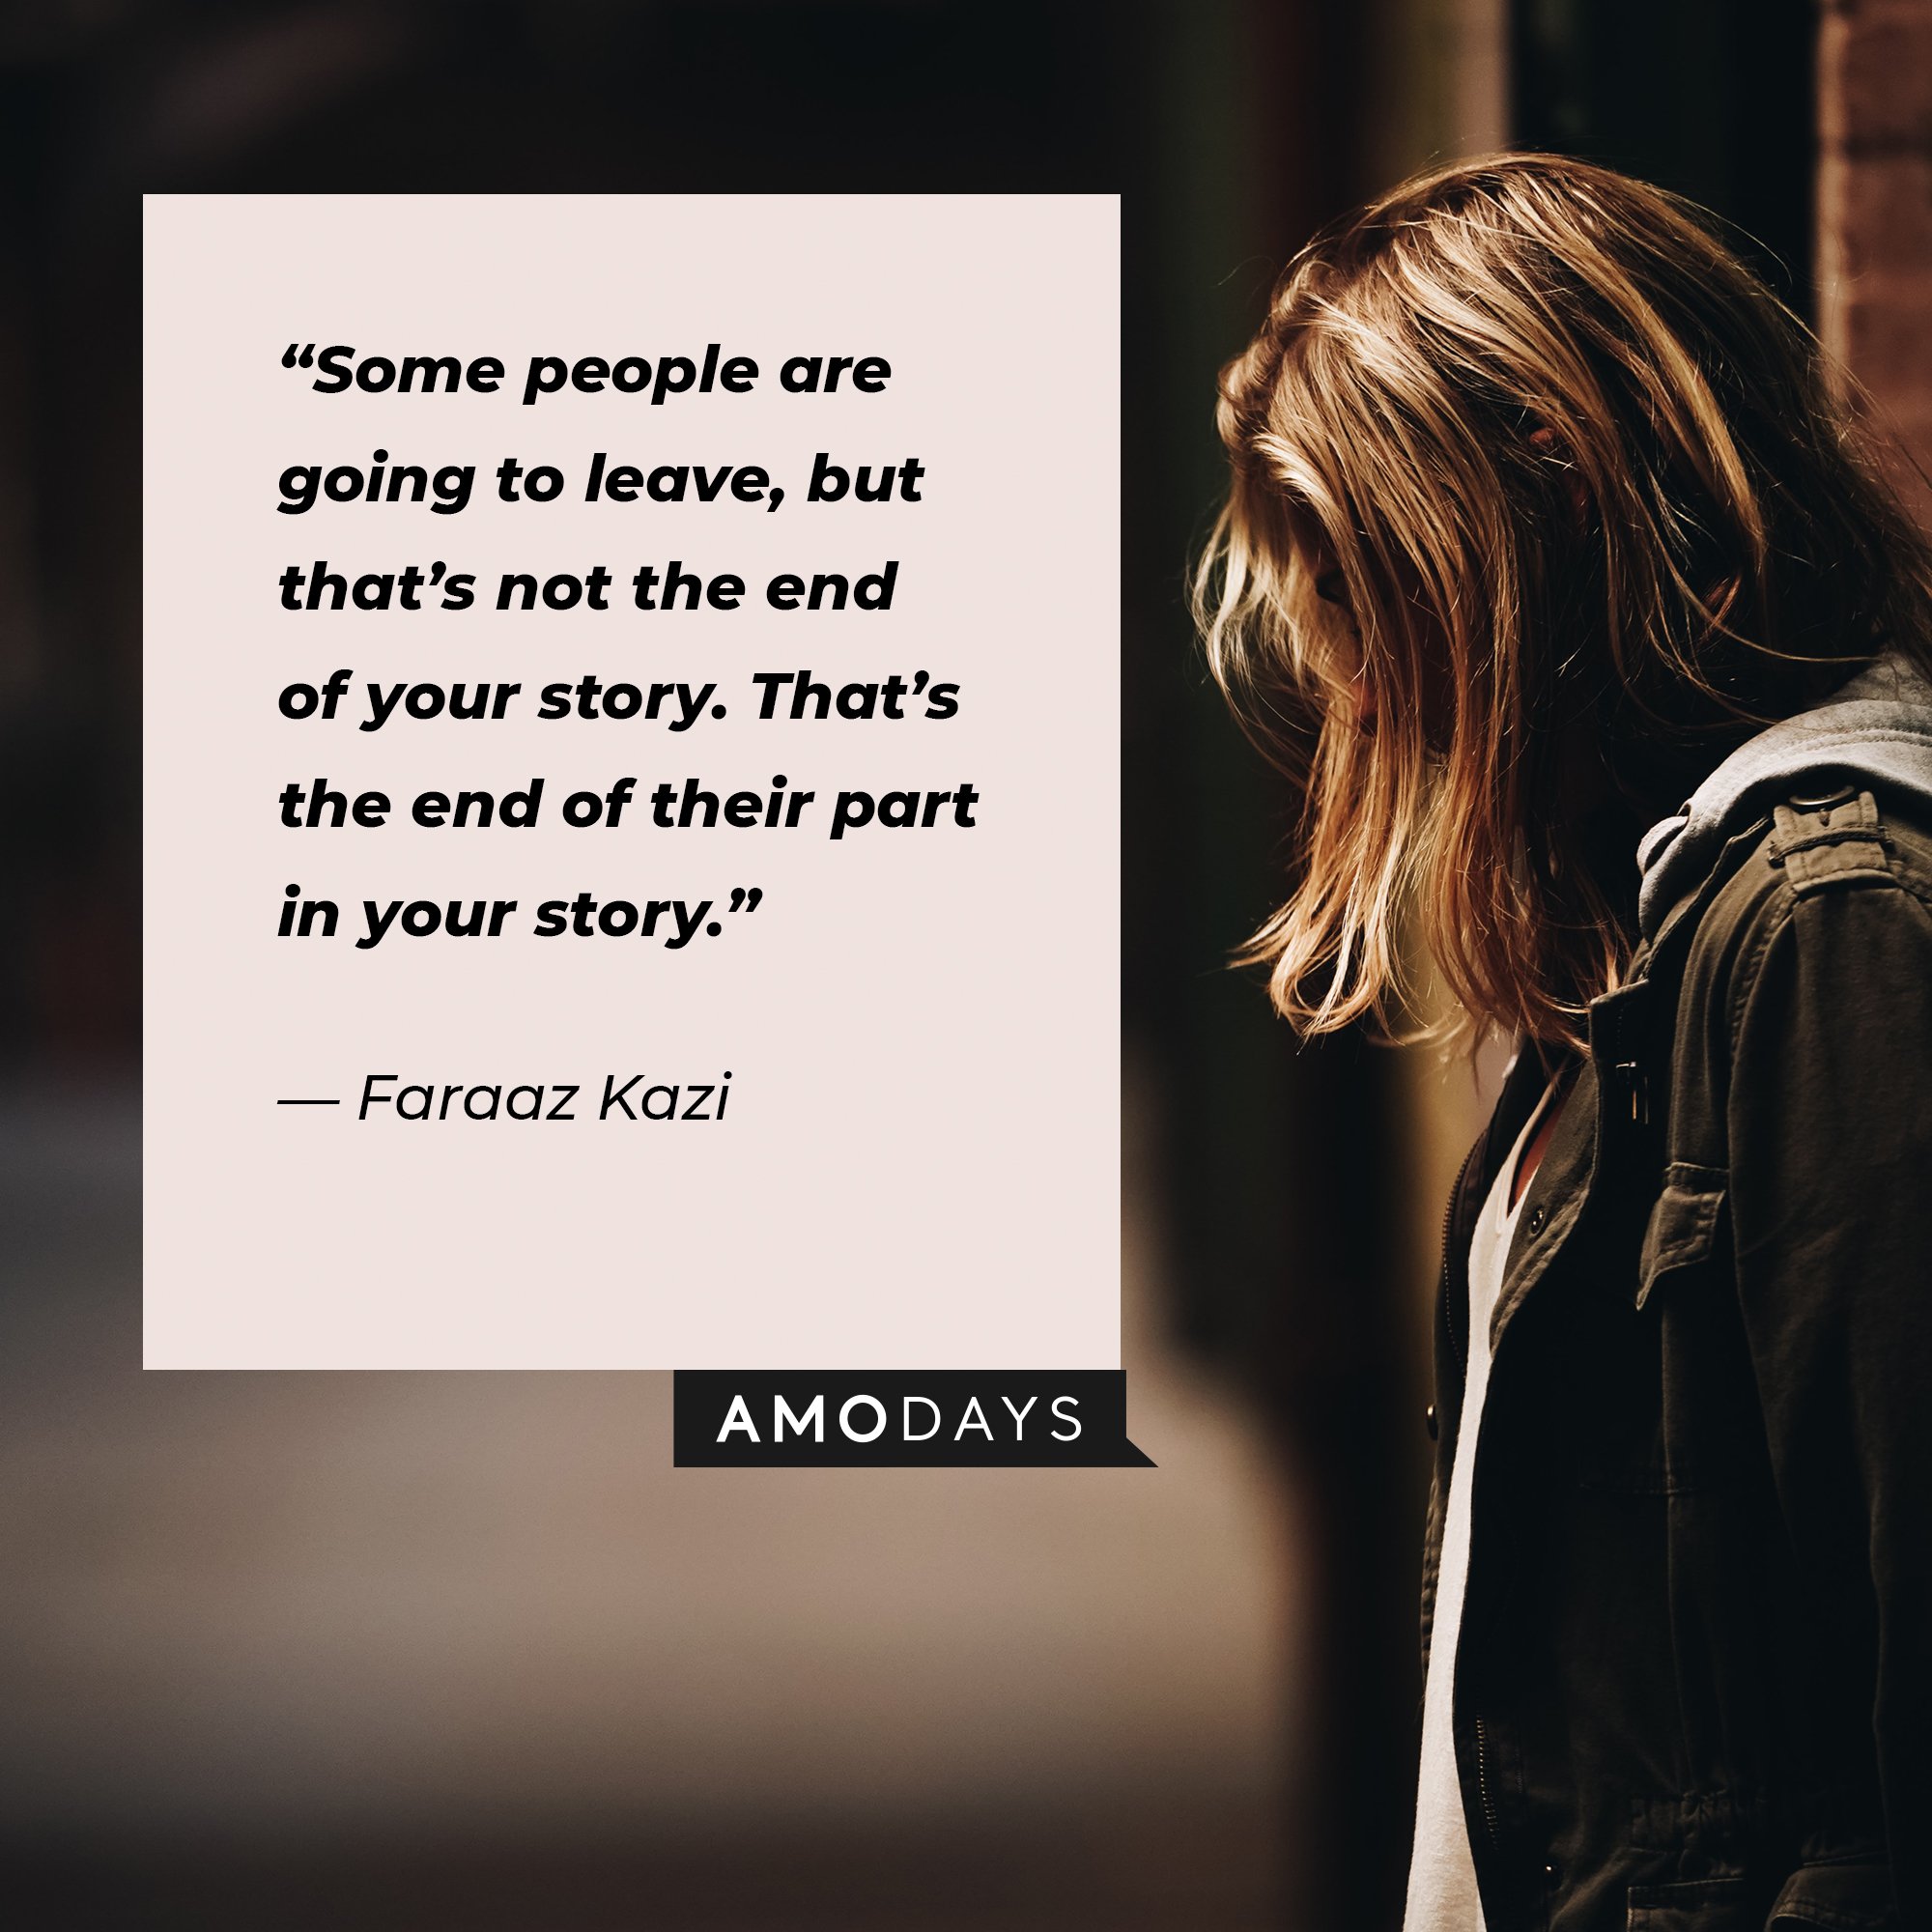  Faraaz Kazi’s quote: “Some people are going to leave, but that’s not the end of your story. That’s the end of their part in your story.” | Image: AmoDays